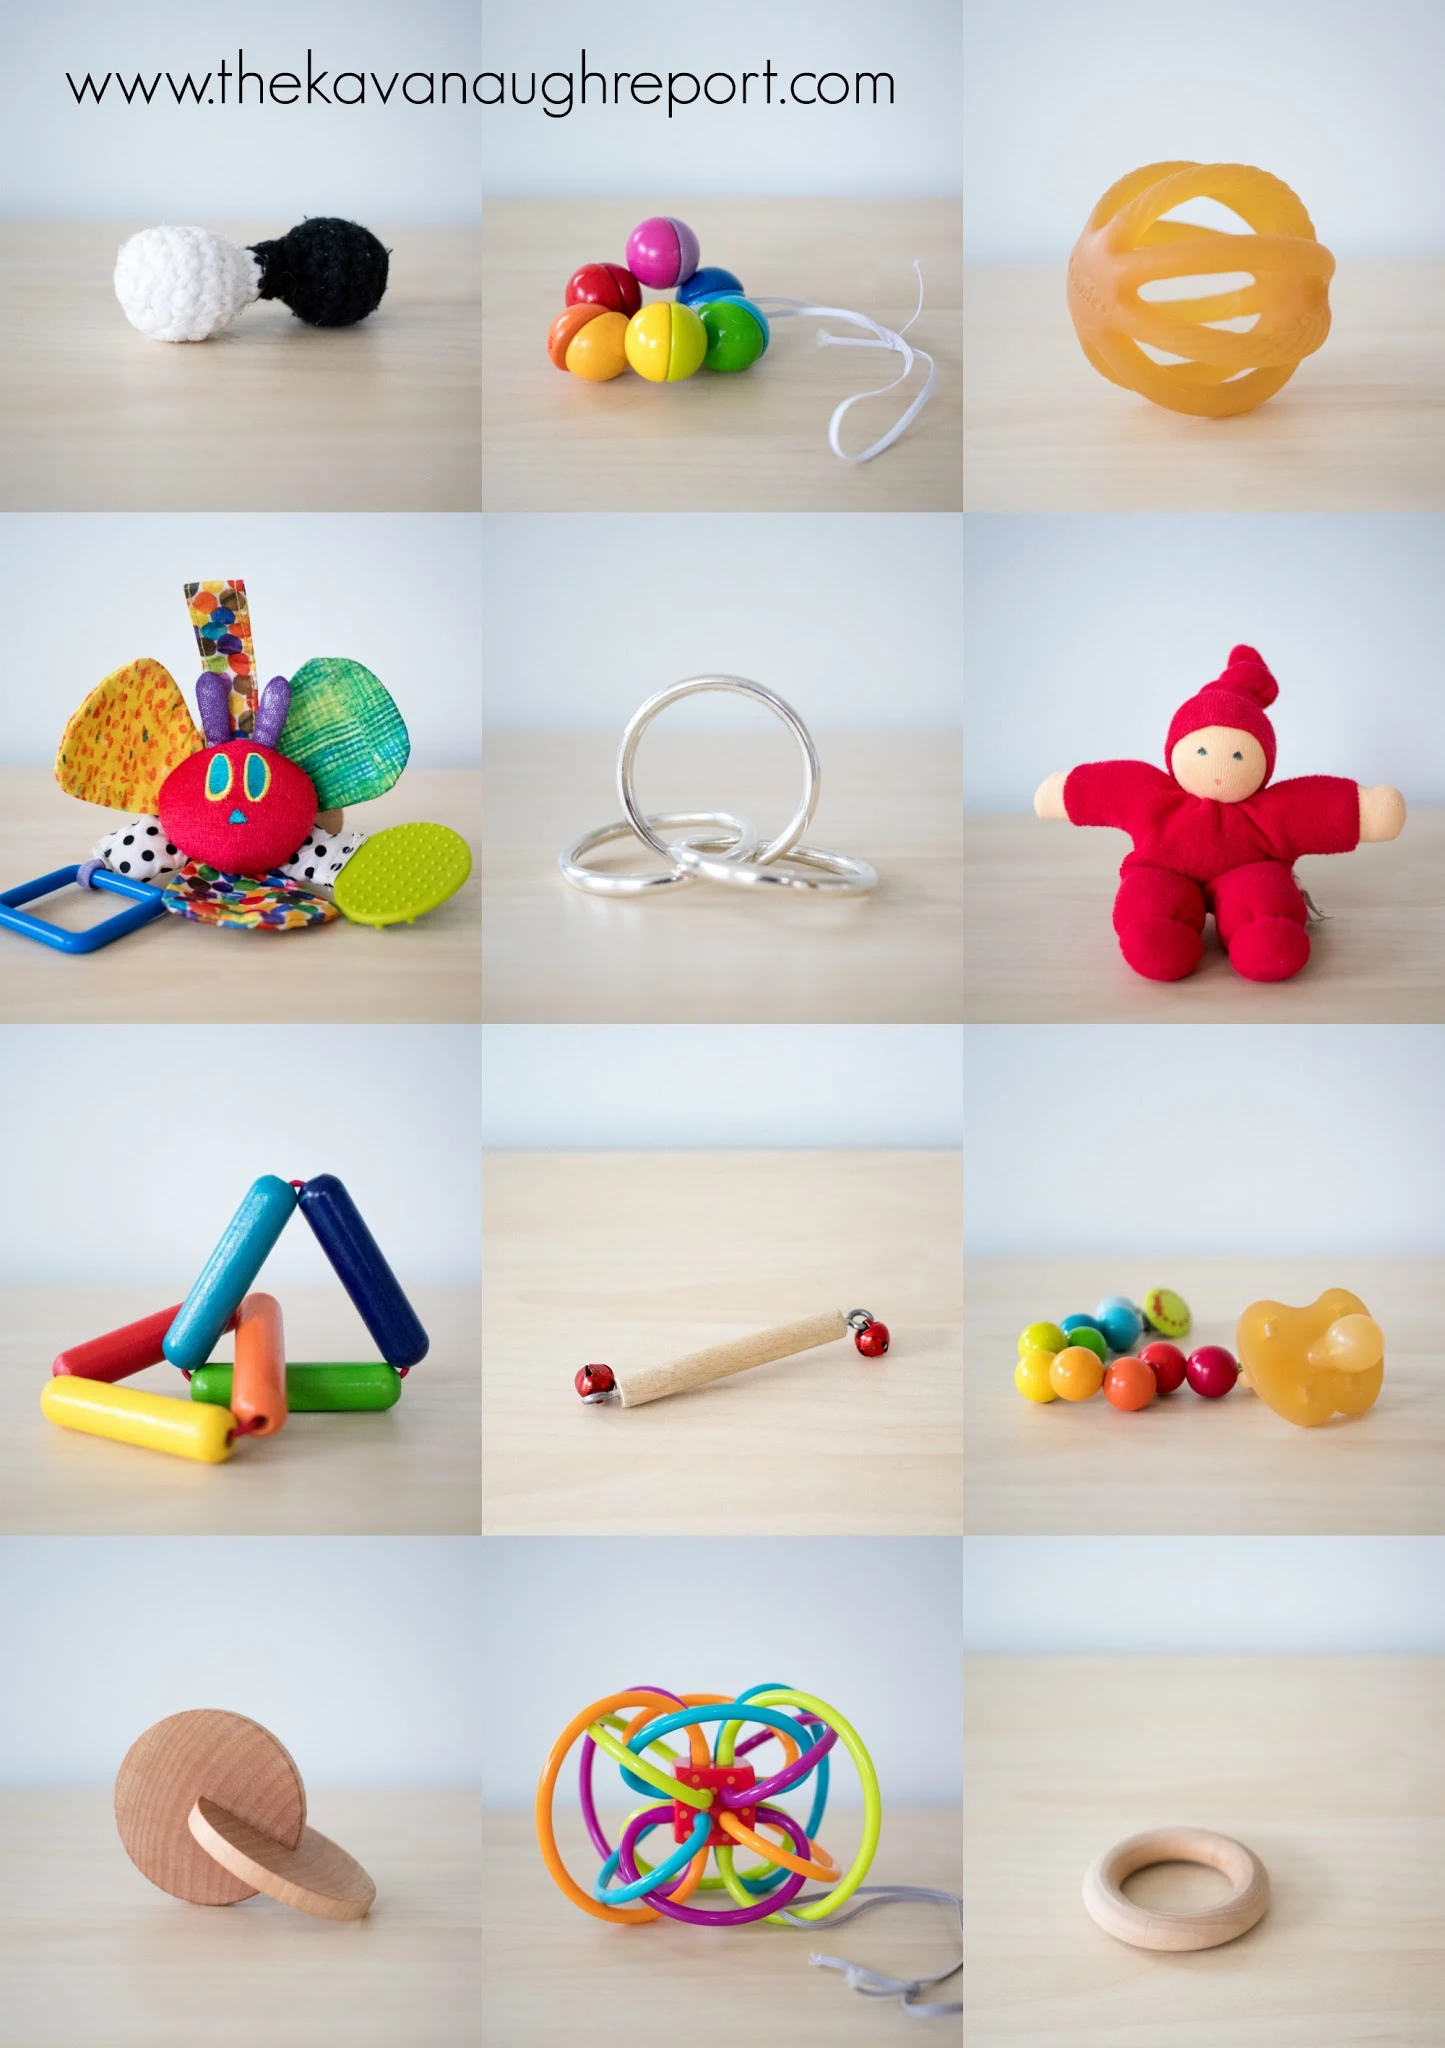 Montessori baby toys at 4-months-old. These Montessori friendly materials are engaging for young infants and provide sensory experiences.